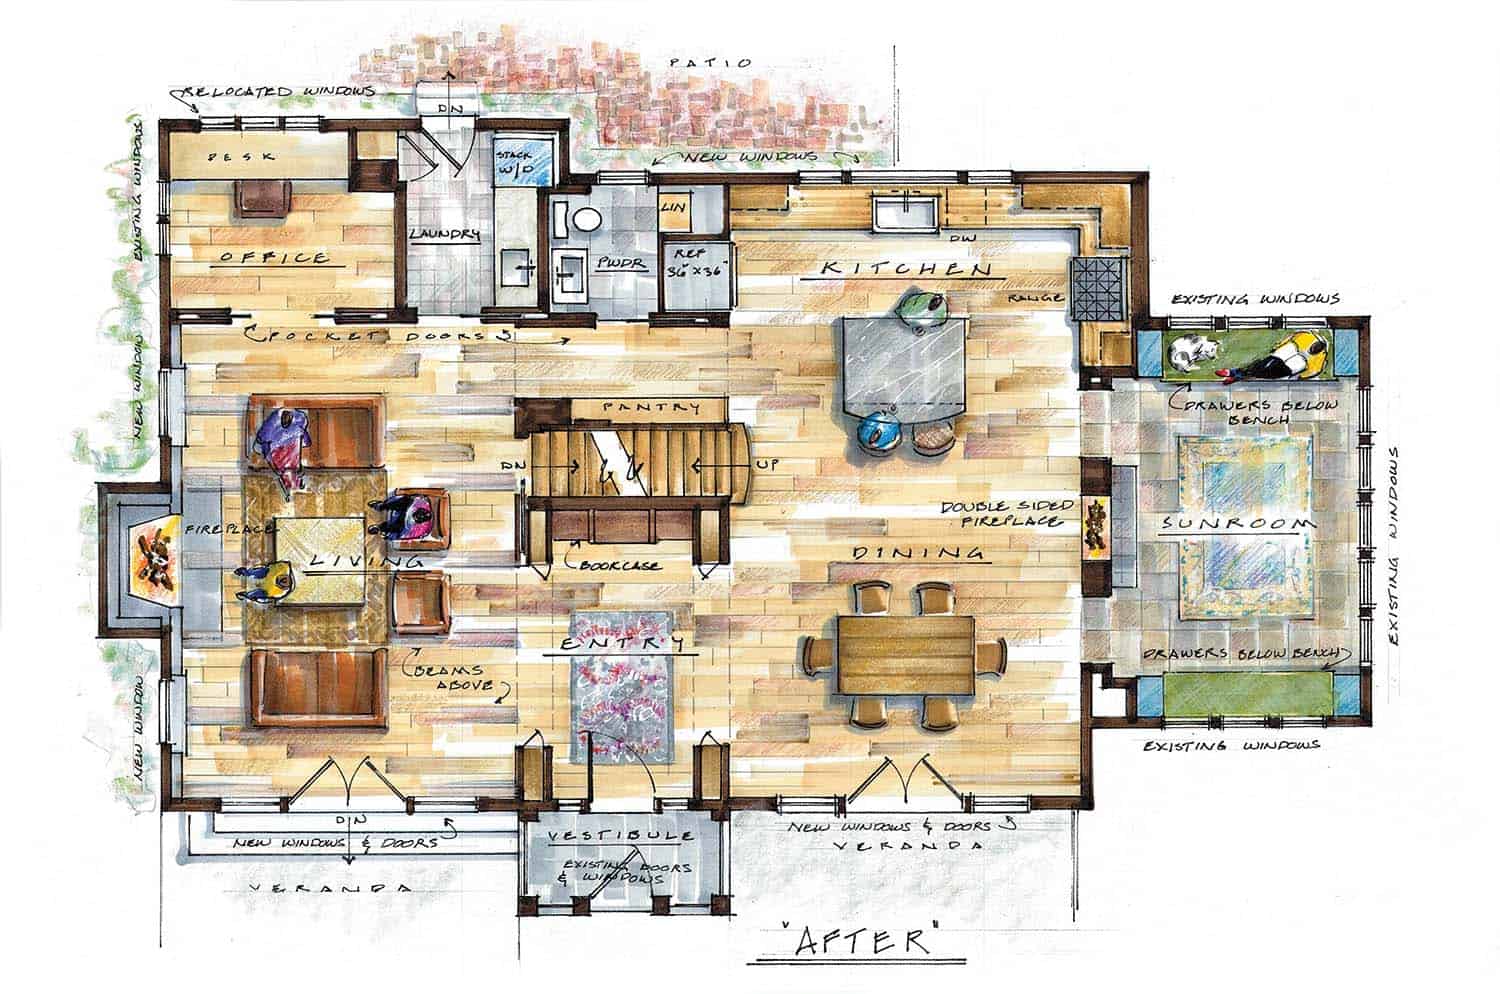 historic home floor plan after the renovation